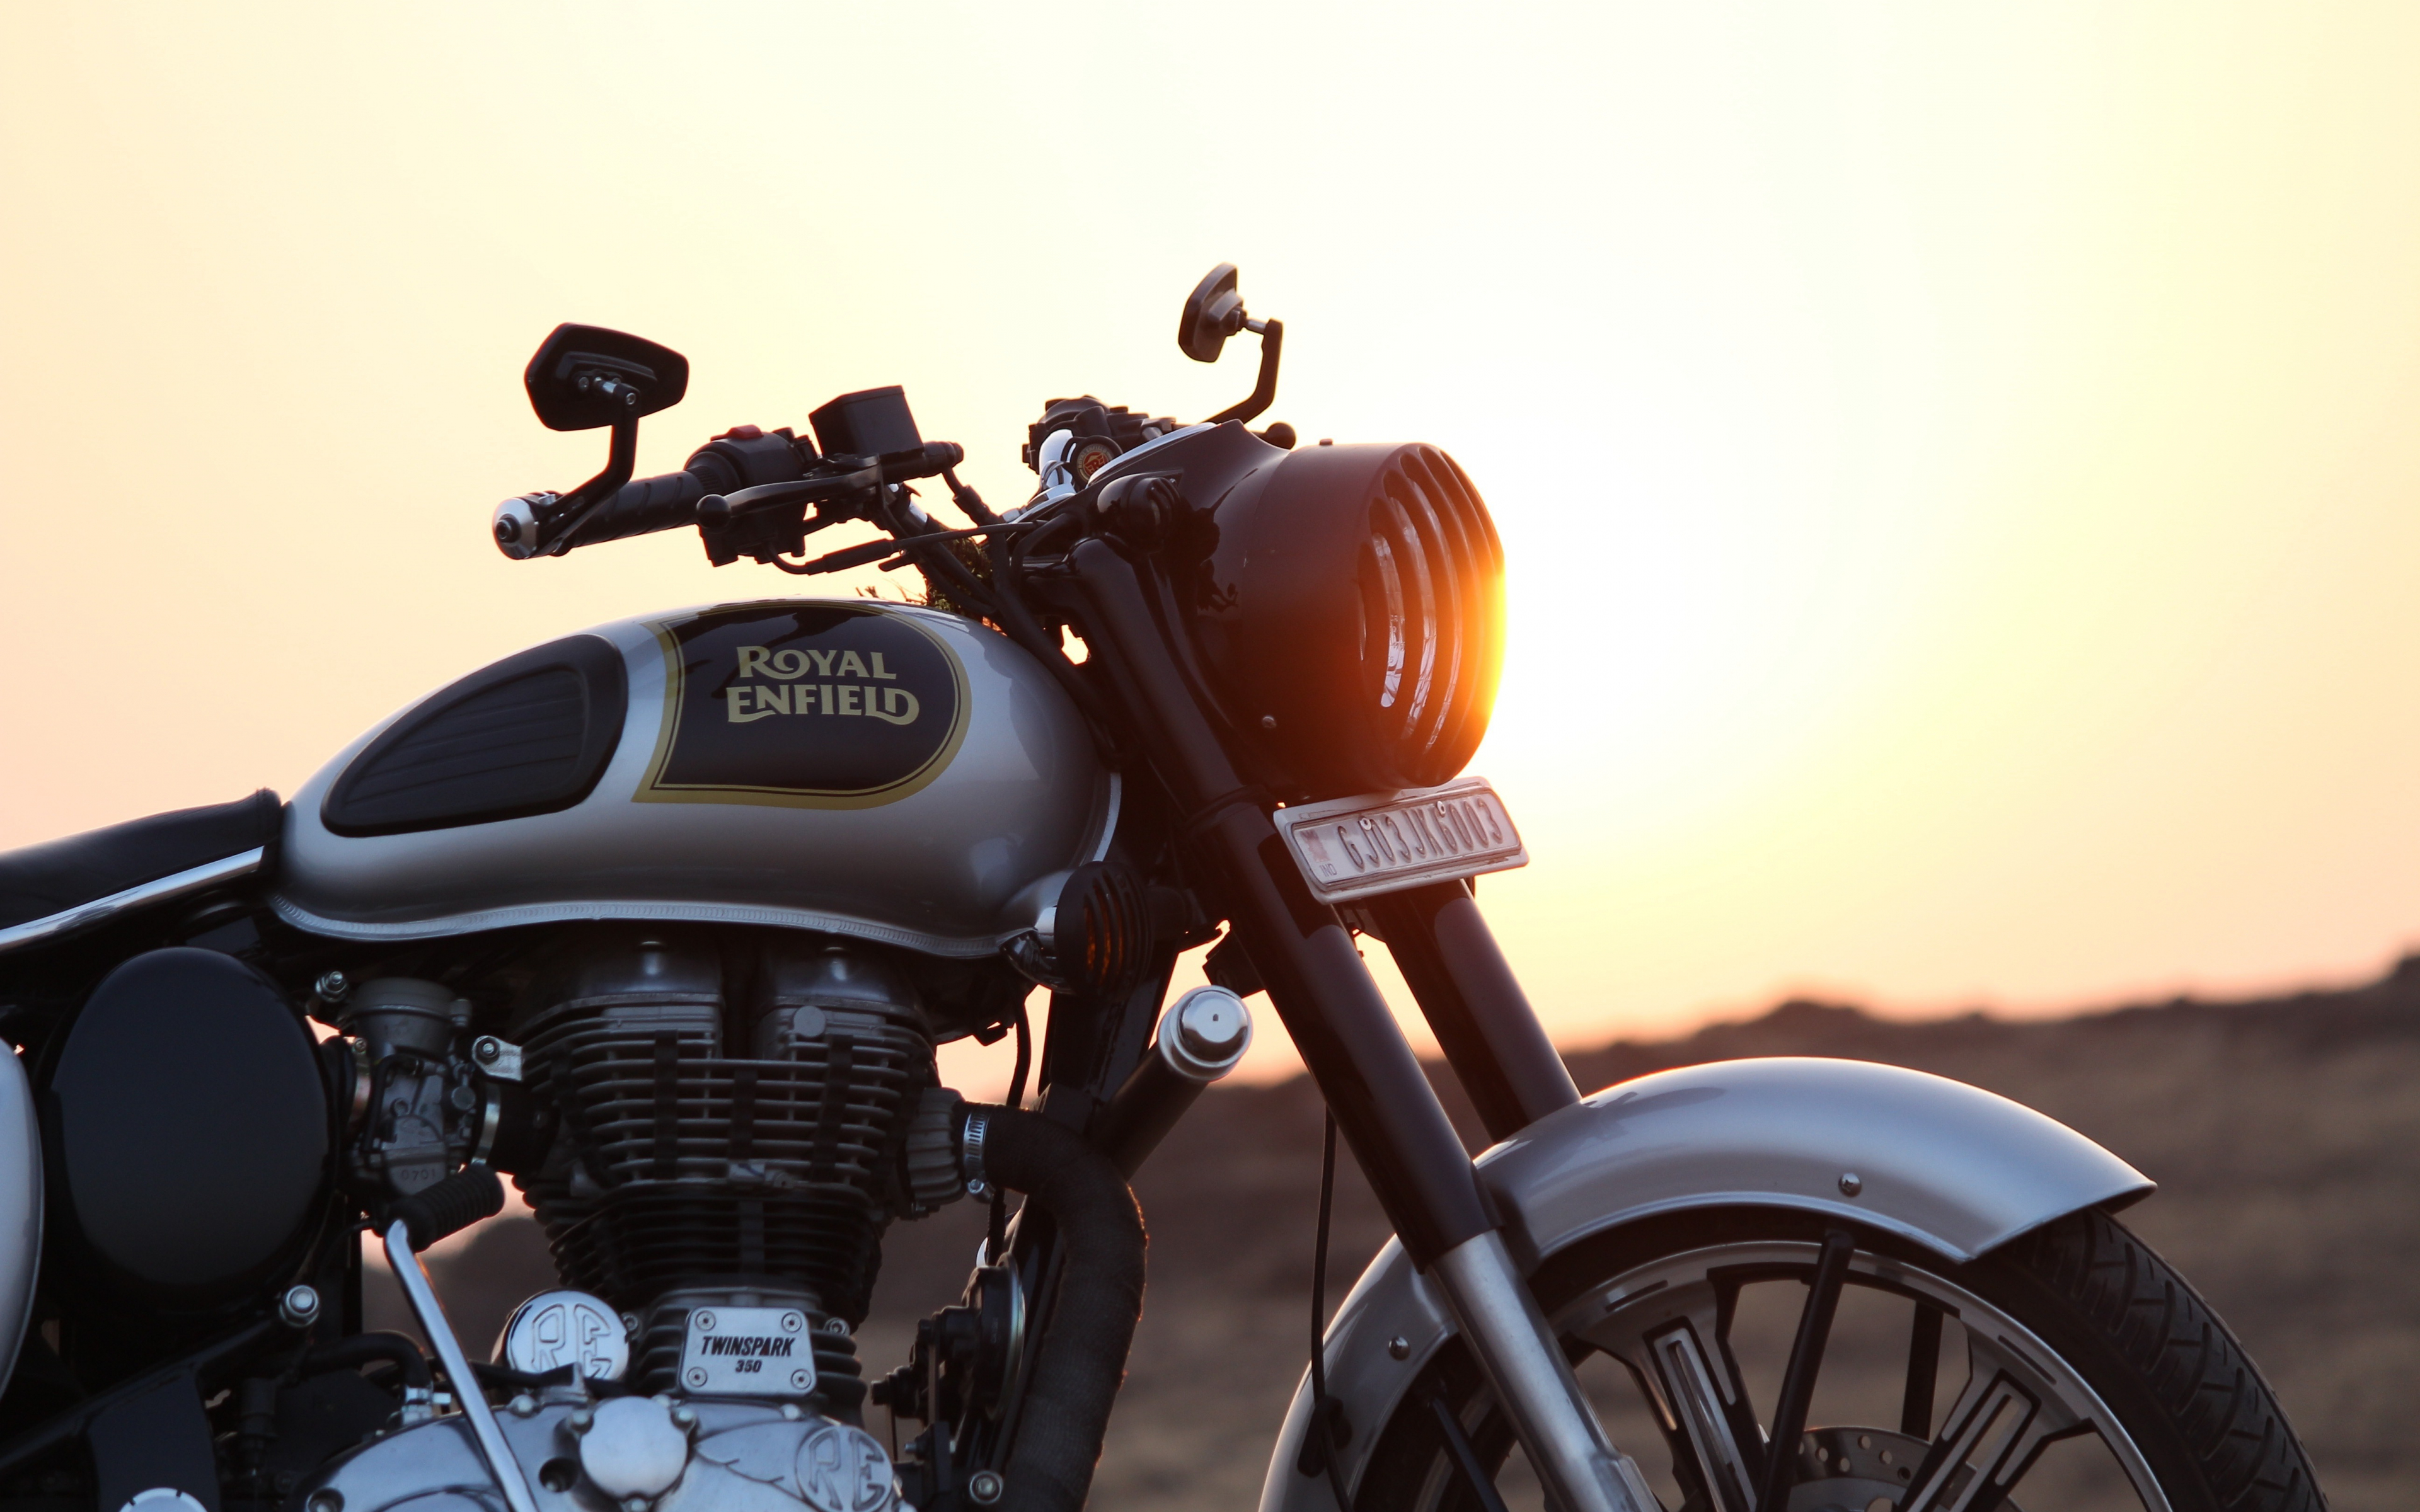 Download wallpaper 1440x2960 royal enfield motorcycle samsung galaxy s8  samsung galaxy s8 plus 1440x2960 hd background 1034